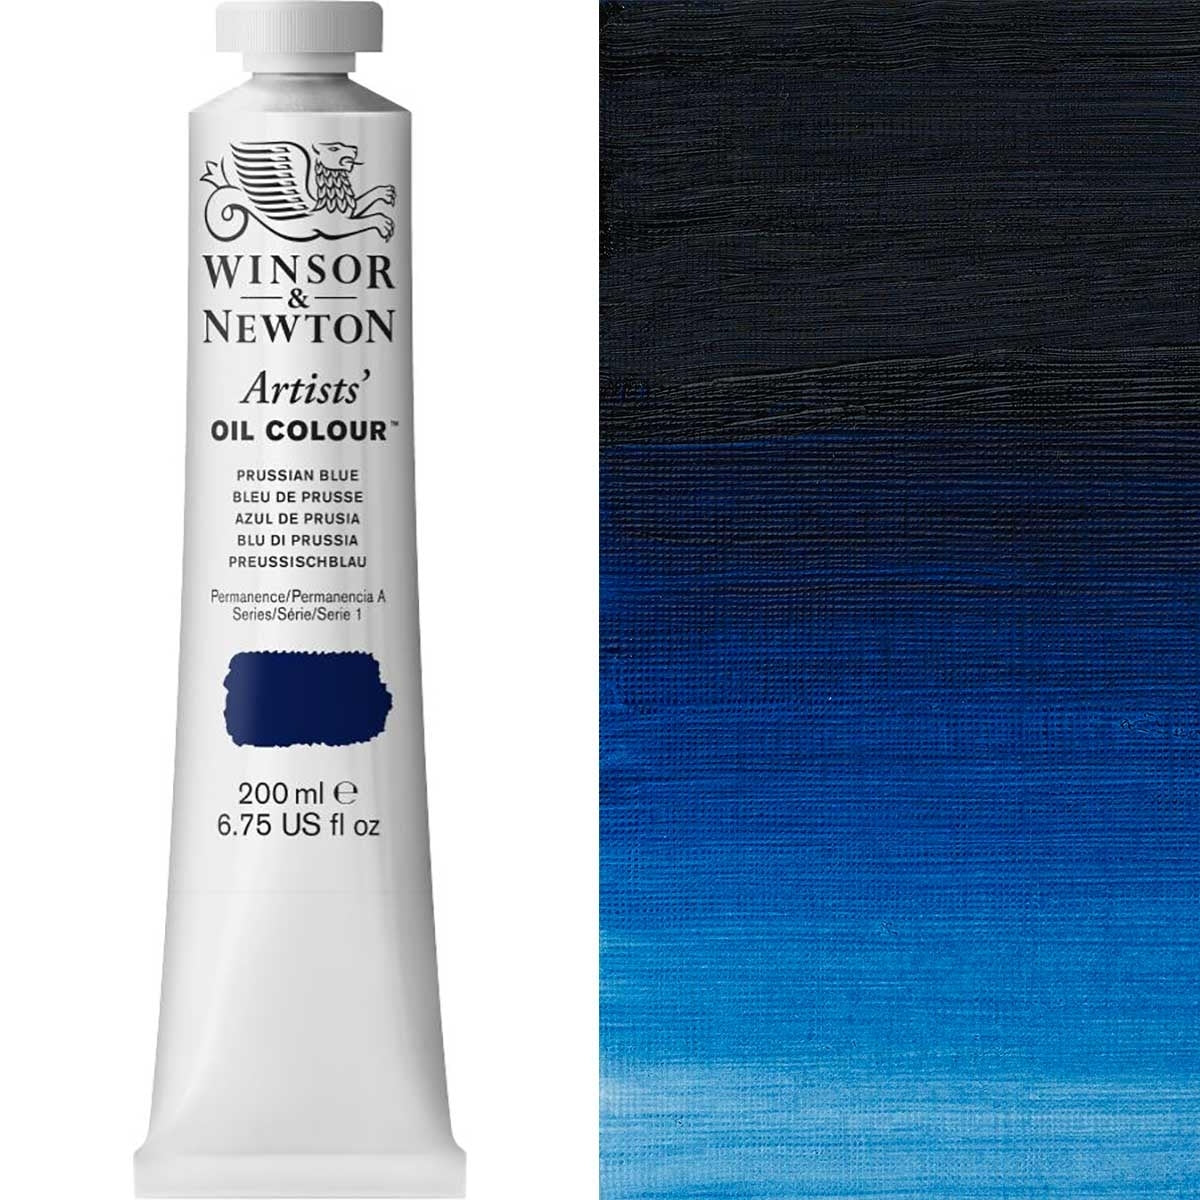 Winsor and Newton - Artists' Oil Colour - 200ml - Prussian Blue